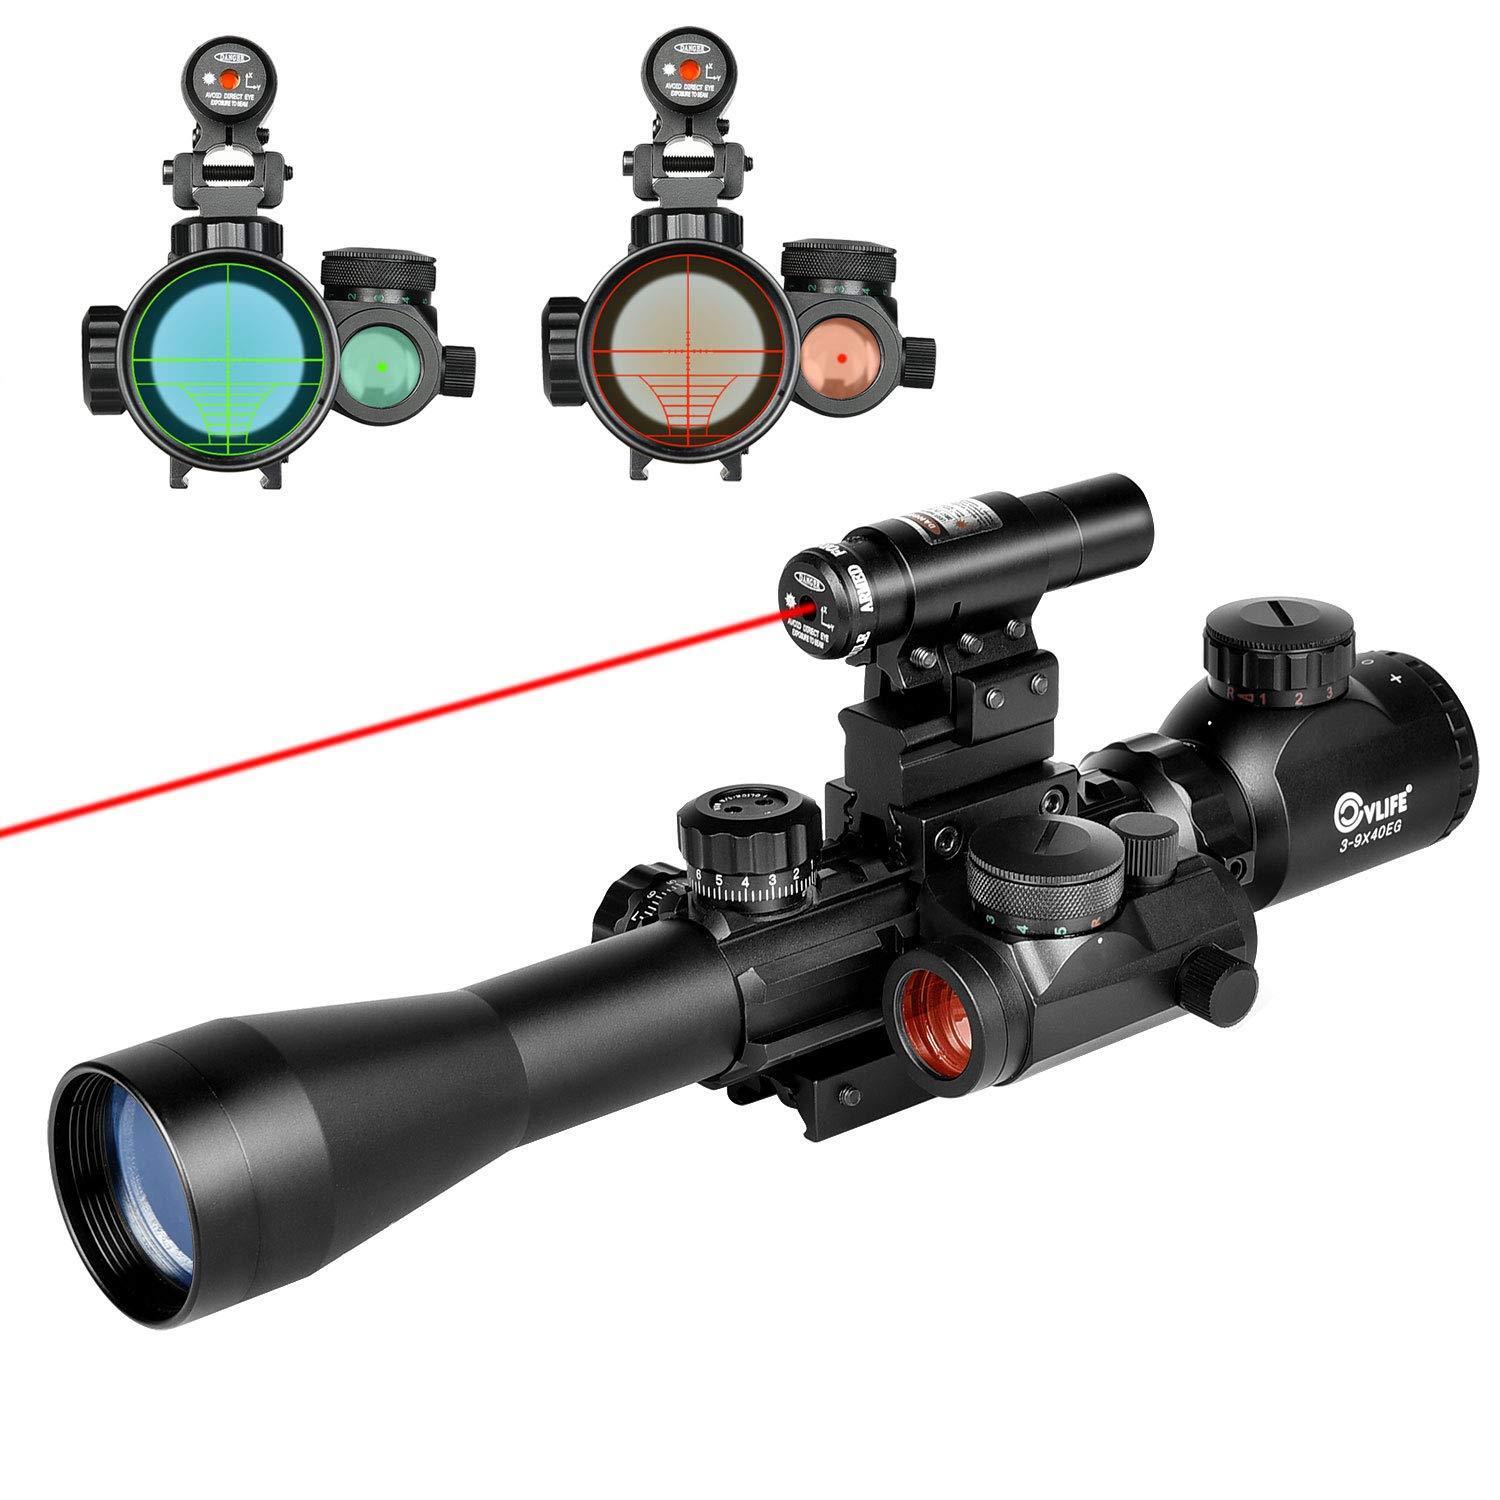 3-9X40 Illuminated Tactical Scope with Red Laser & Holographic Dot Sight